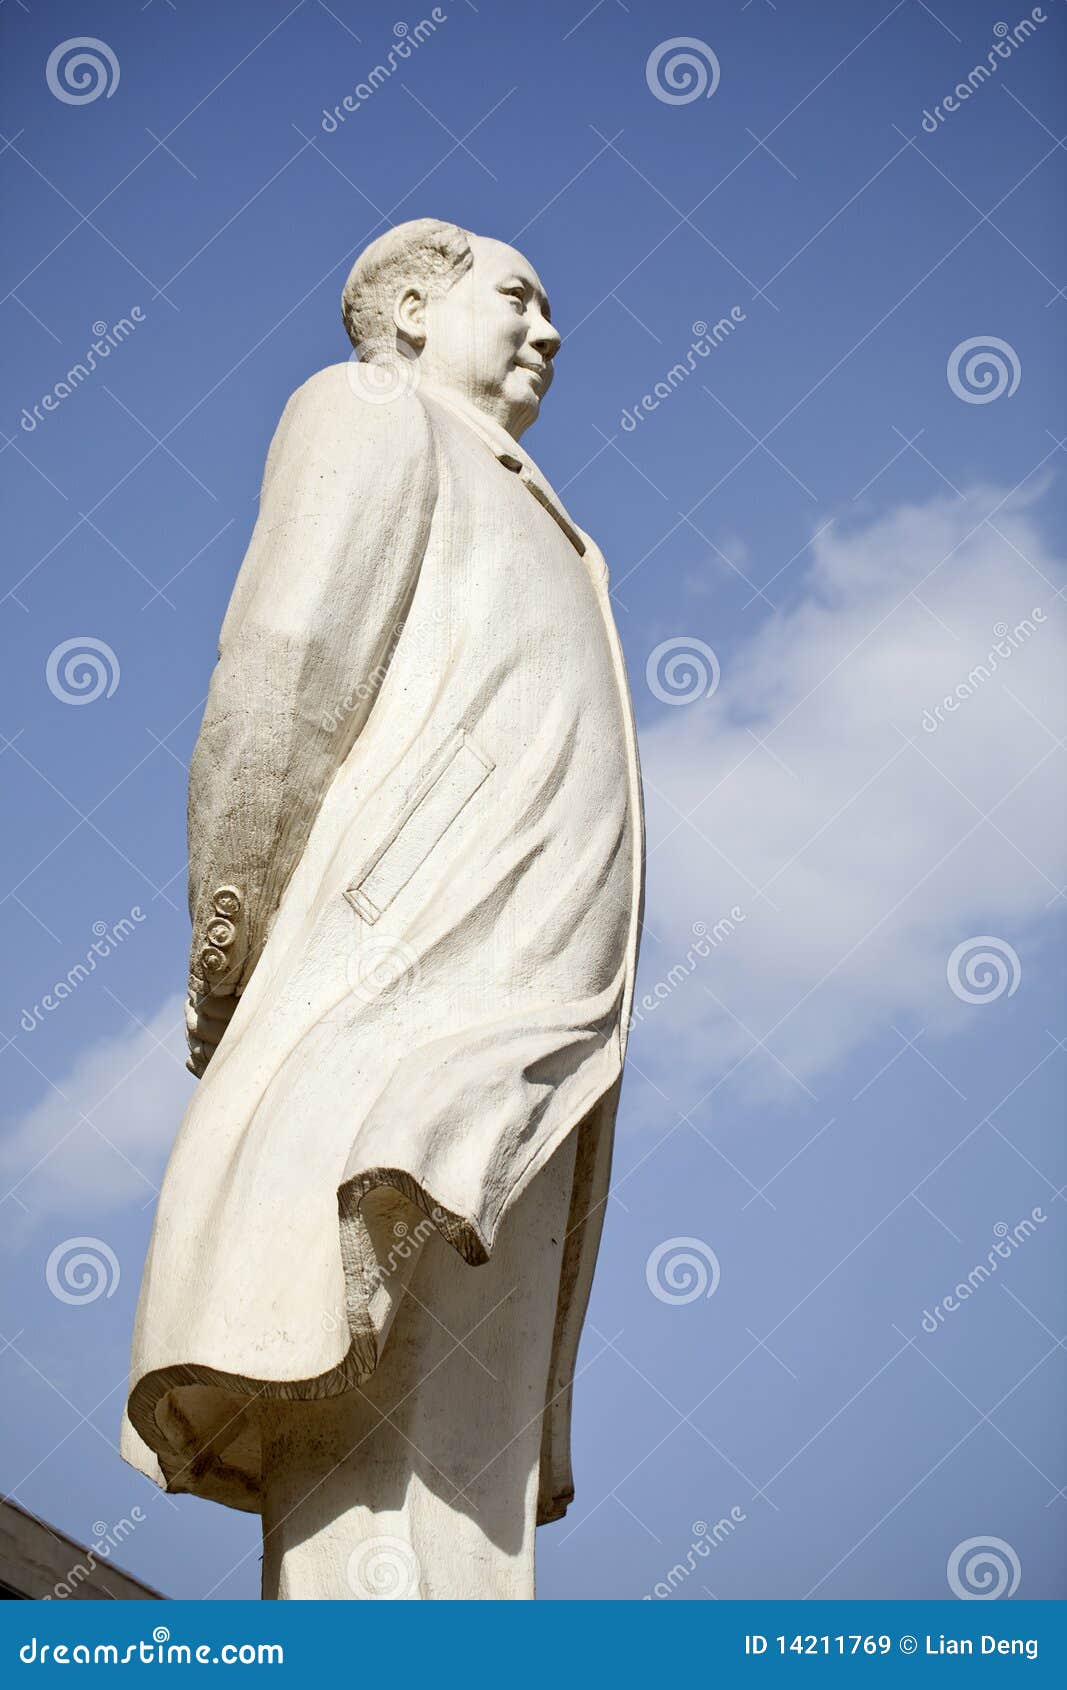 marble statue of chairman mao